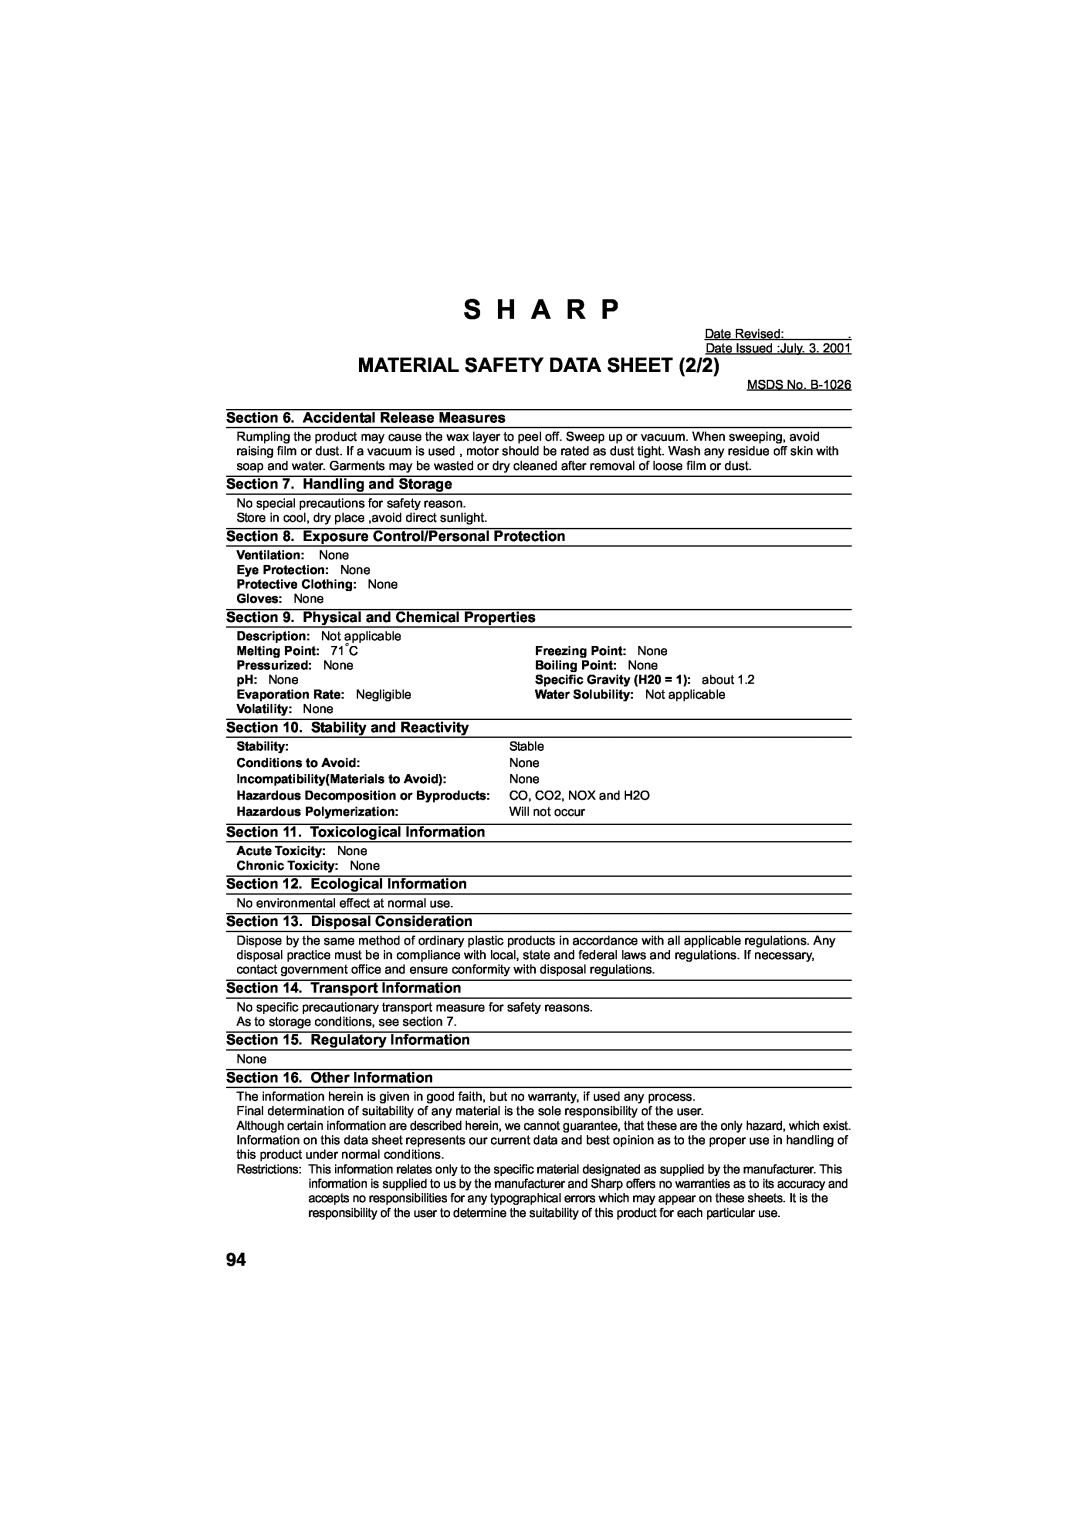 Sharp UX-A260 manual MATERIAL SAFETY DATA SHEET 2/2, S H A R P 